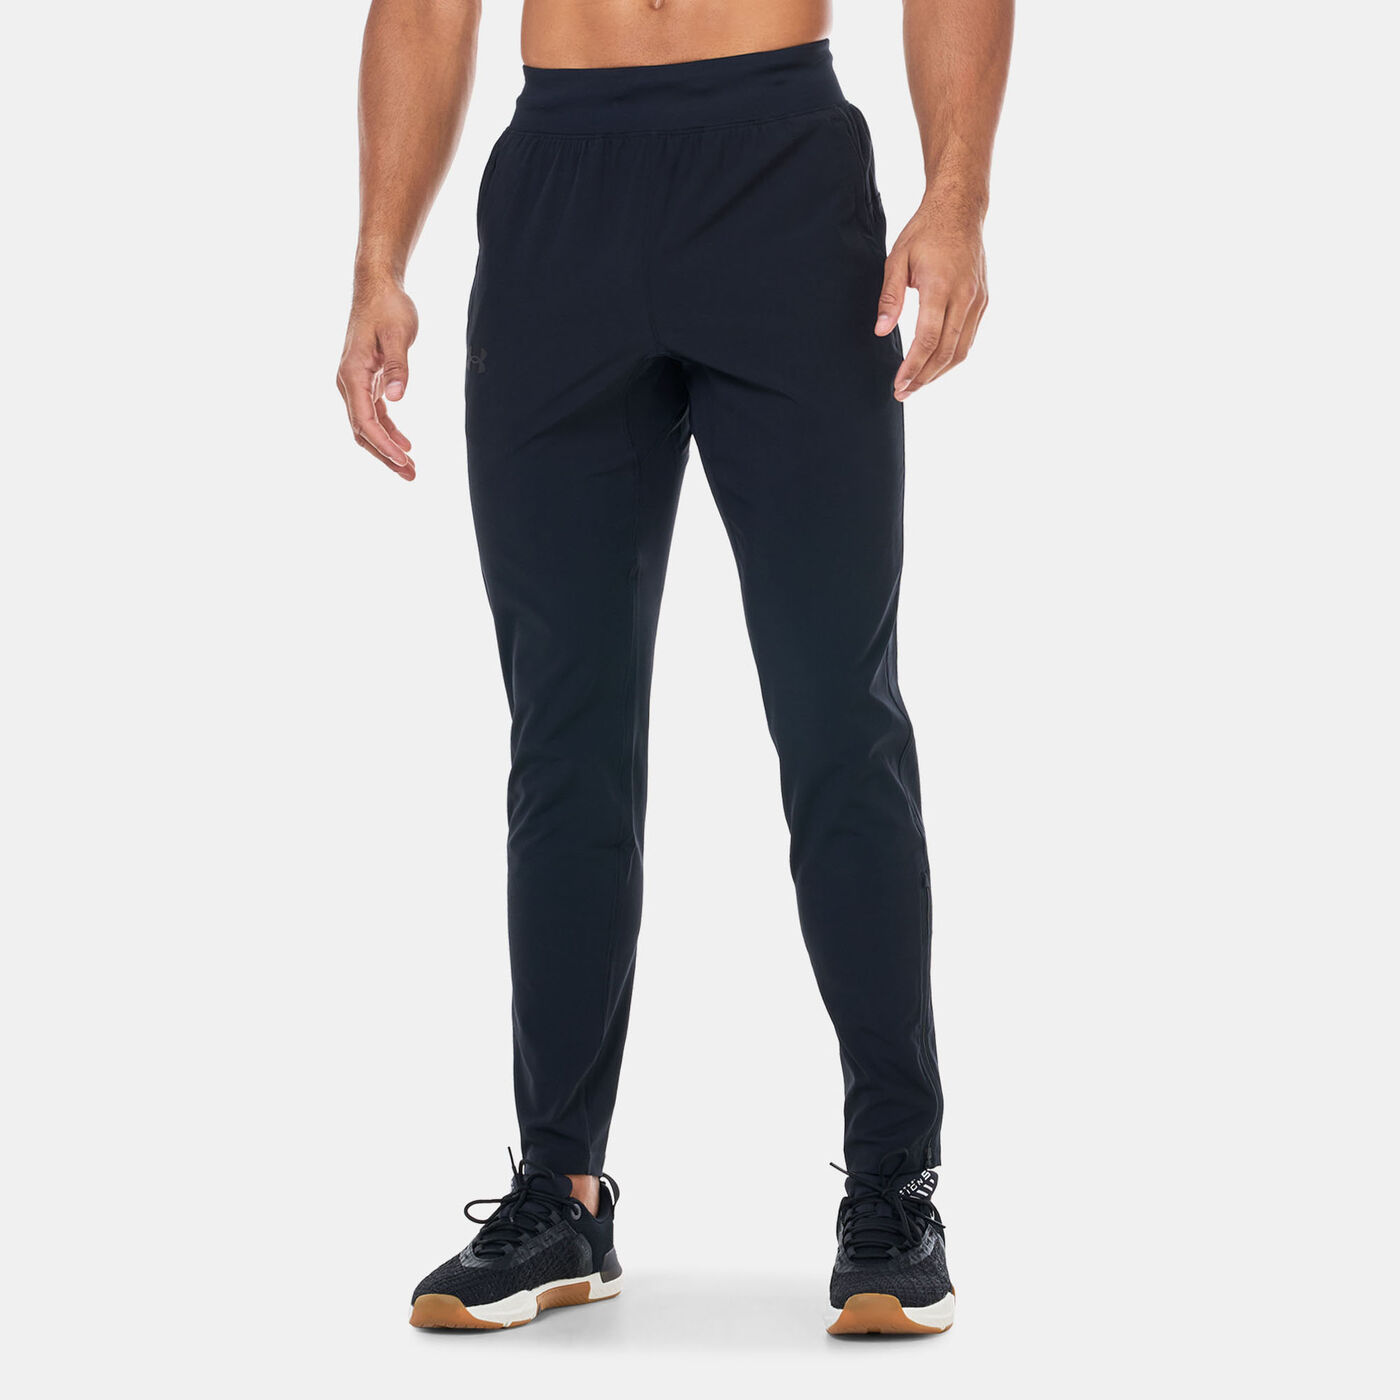 Men's OutRun The Storm Running Pants